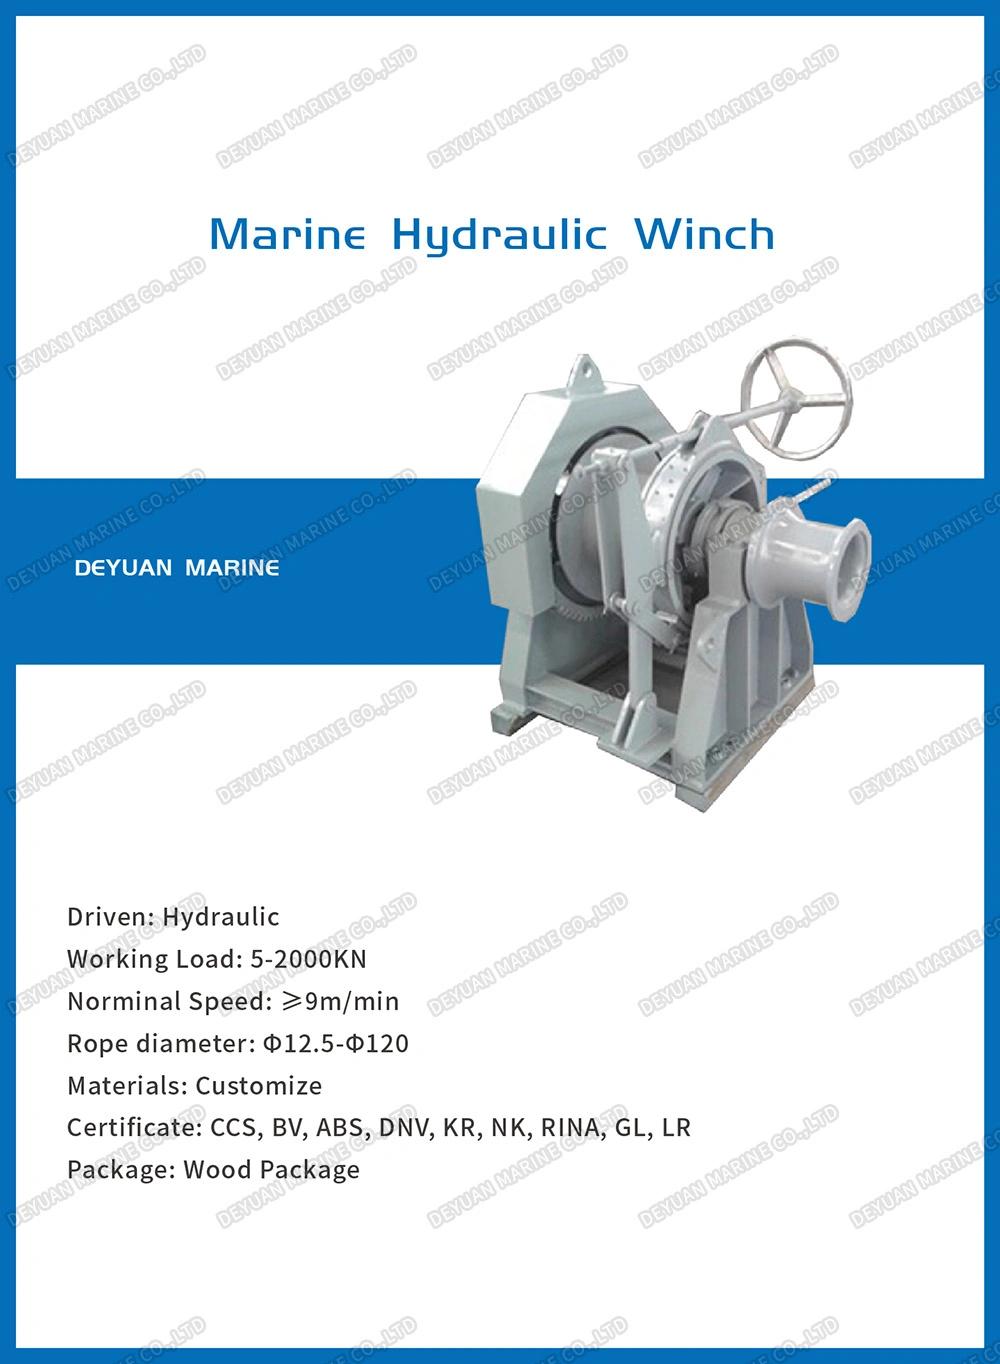 Marine Hydraulic Towing Winch for Boat